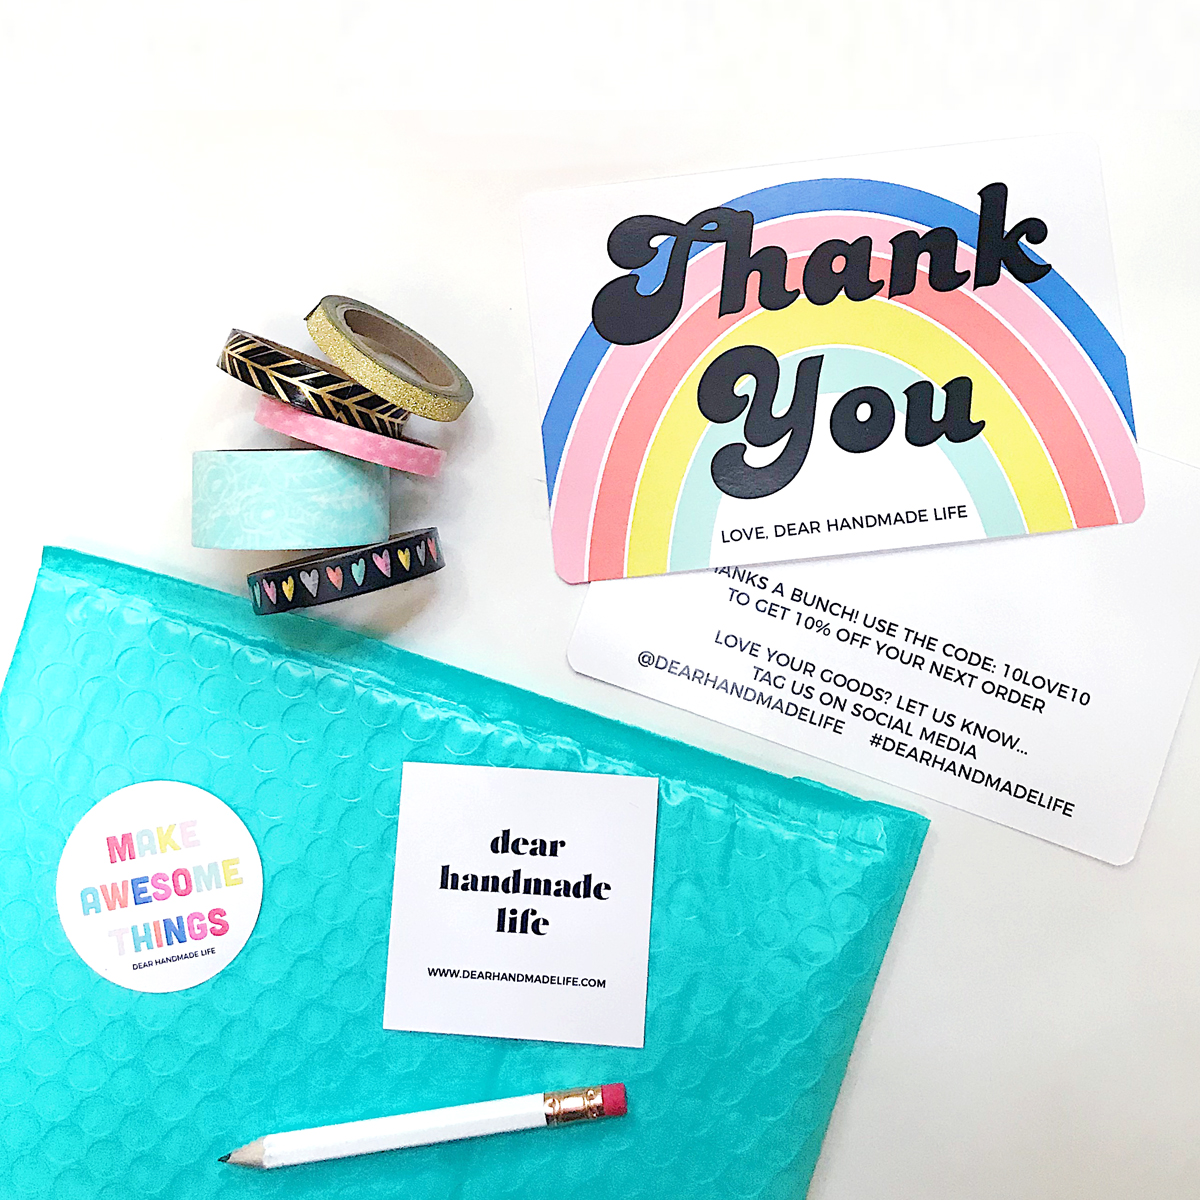 How to create a memorable on-brand unboxing experience Dear Handmade Life